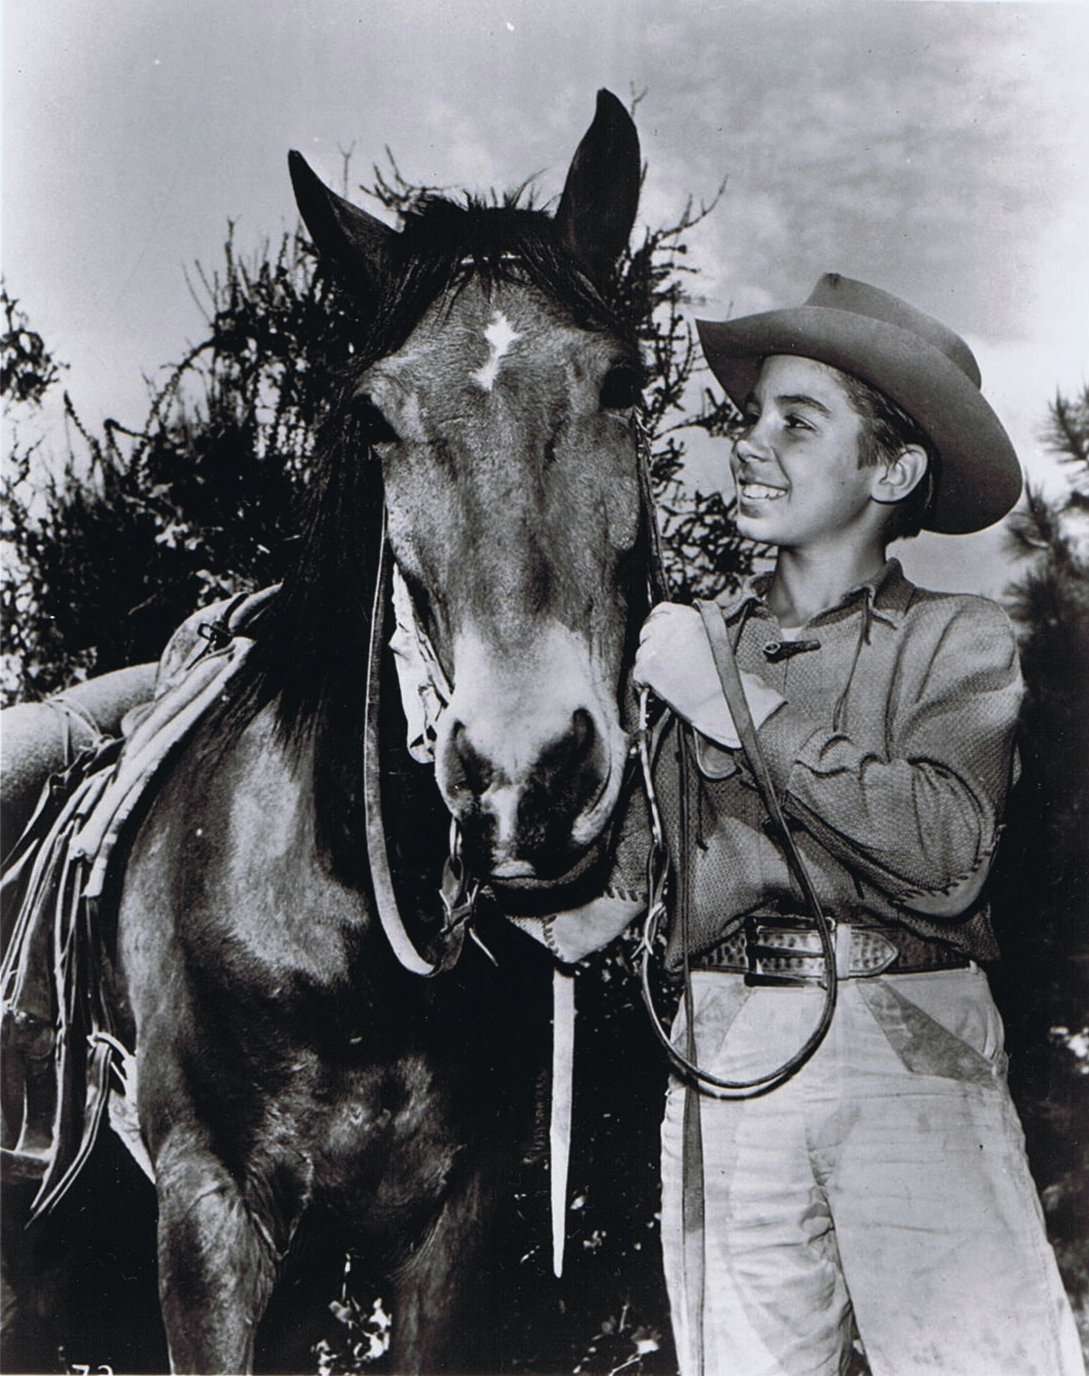 Mark McCain (Johnny Crawford) with his horse Blueboy (Bosco) during the first season of The Rifleman (1958-1959).